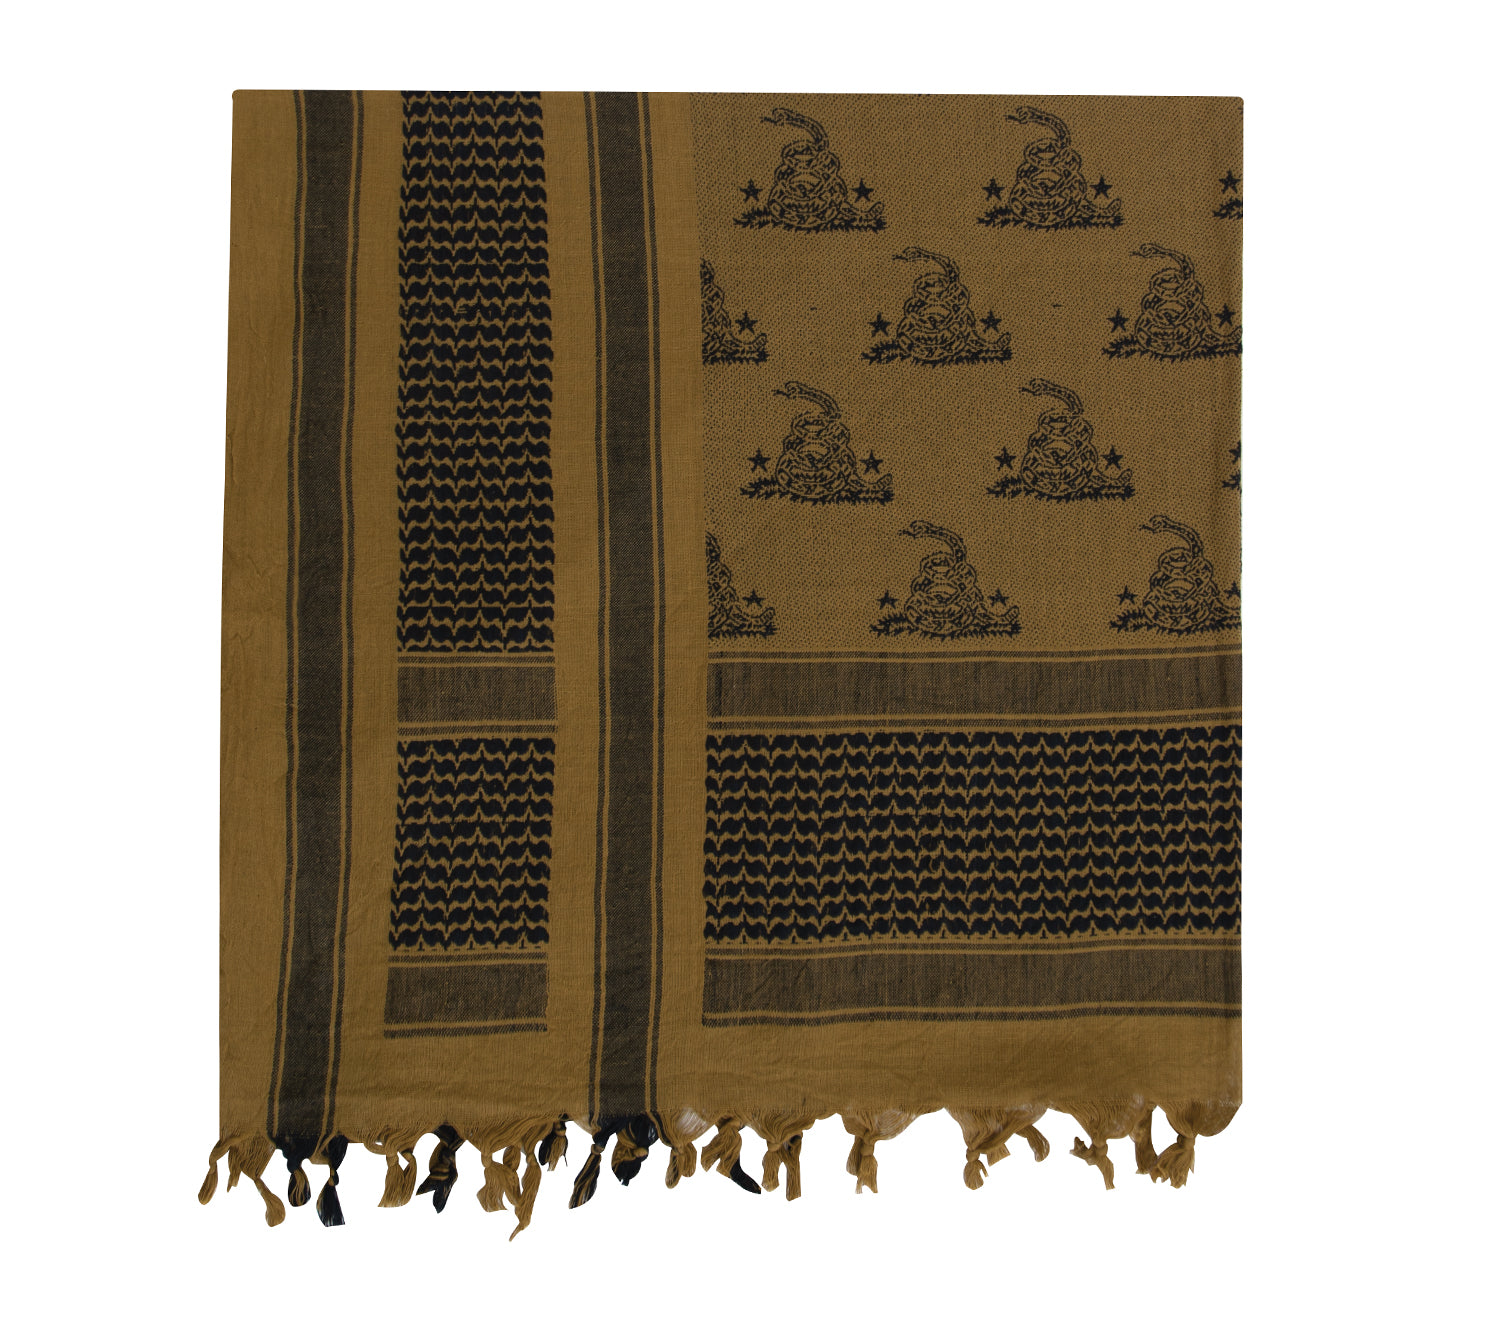 Rothco Gadsden Snake Shemagh Tactical Desert Scarf - Tactical Choice Plus